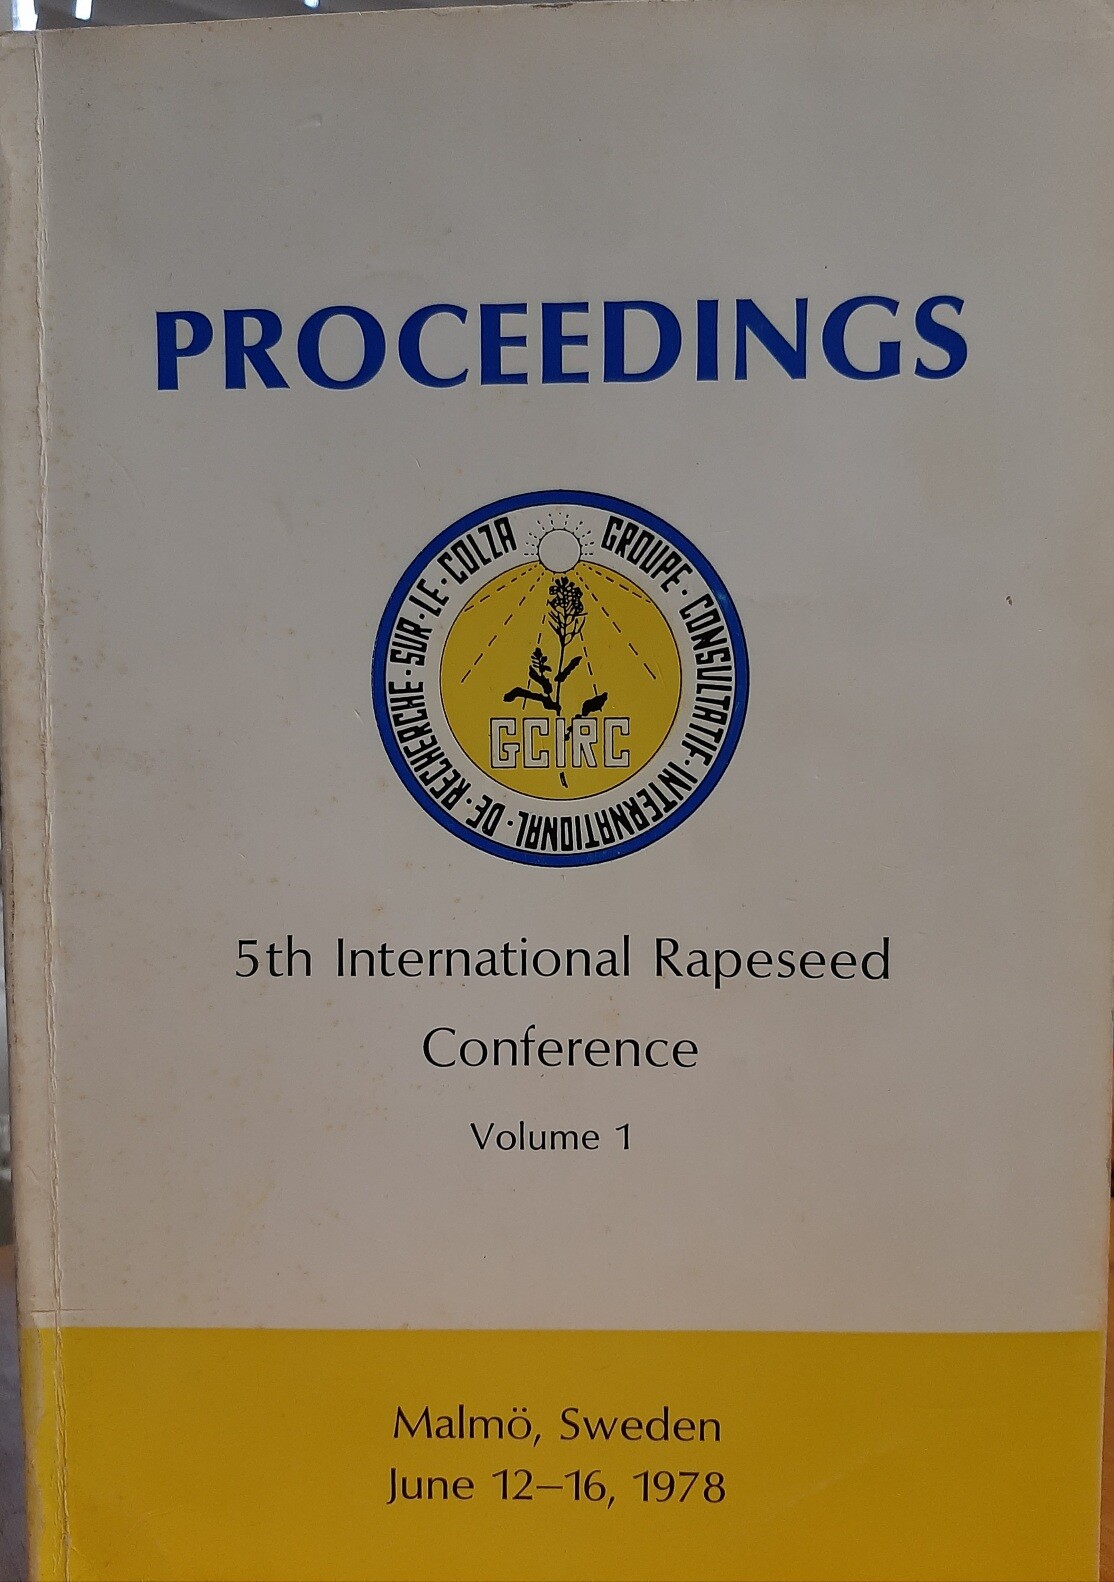 Proceedings of the 5th International Rapeseed Conference Volume 1 (Rippl-Rónai Múzeum CC BY-NC-ND)